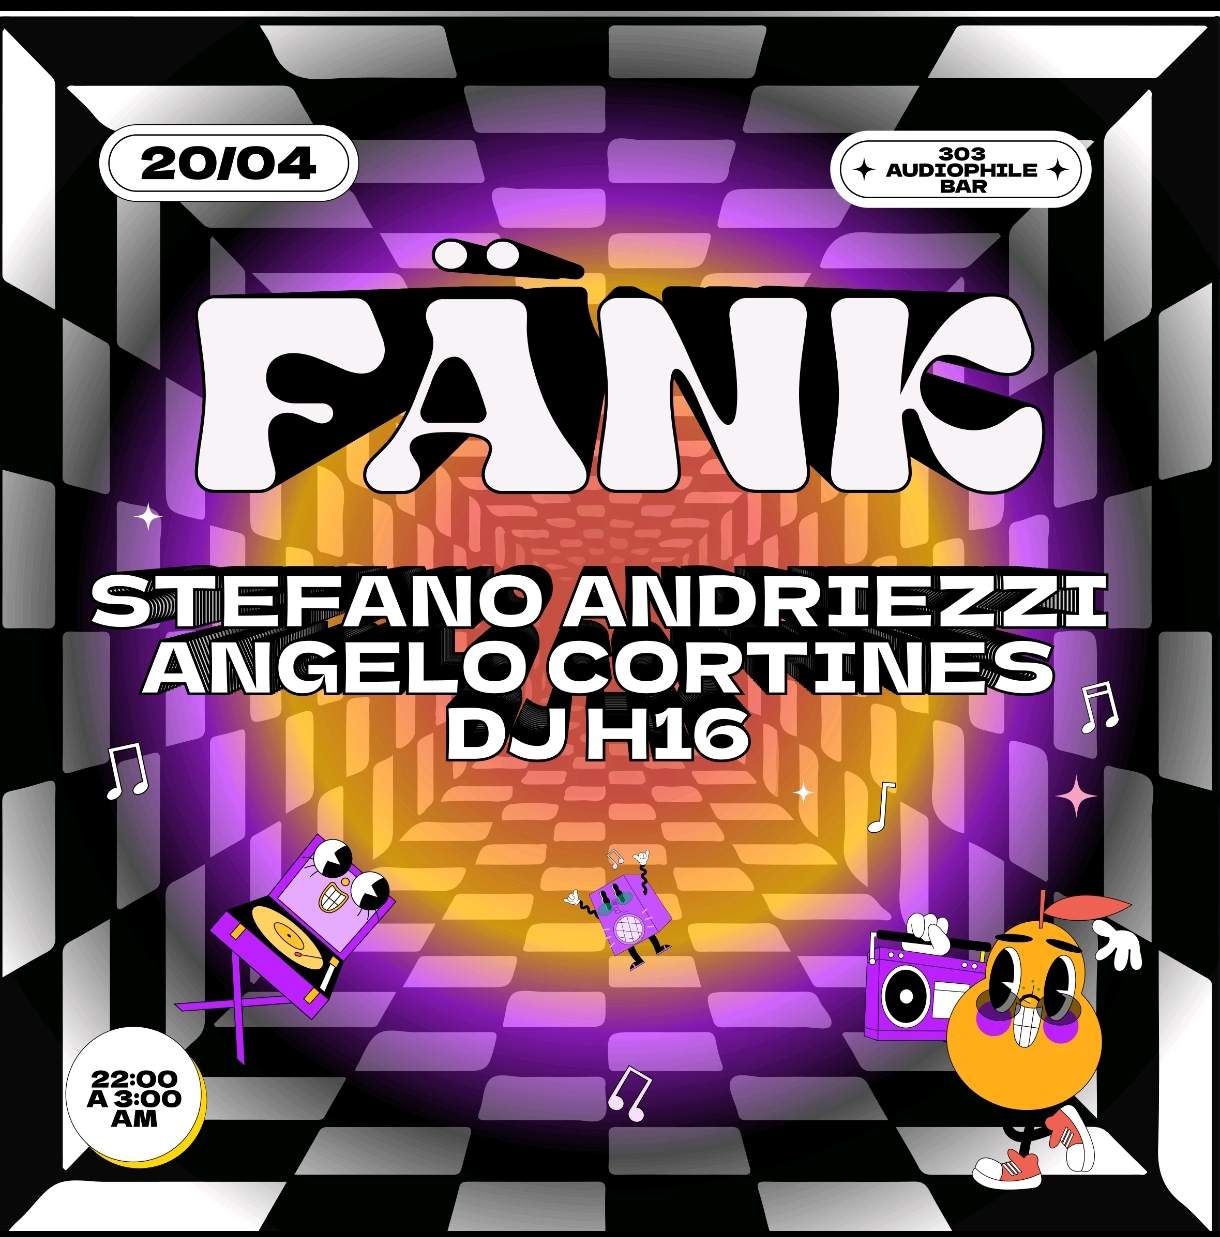 Fänk at 303 / Angelo Cortines / DJ H16 / Stefano Andriezzi - フライヤー表